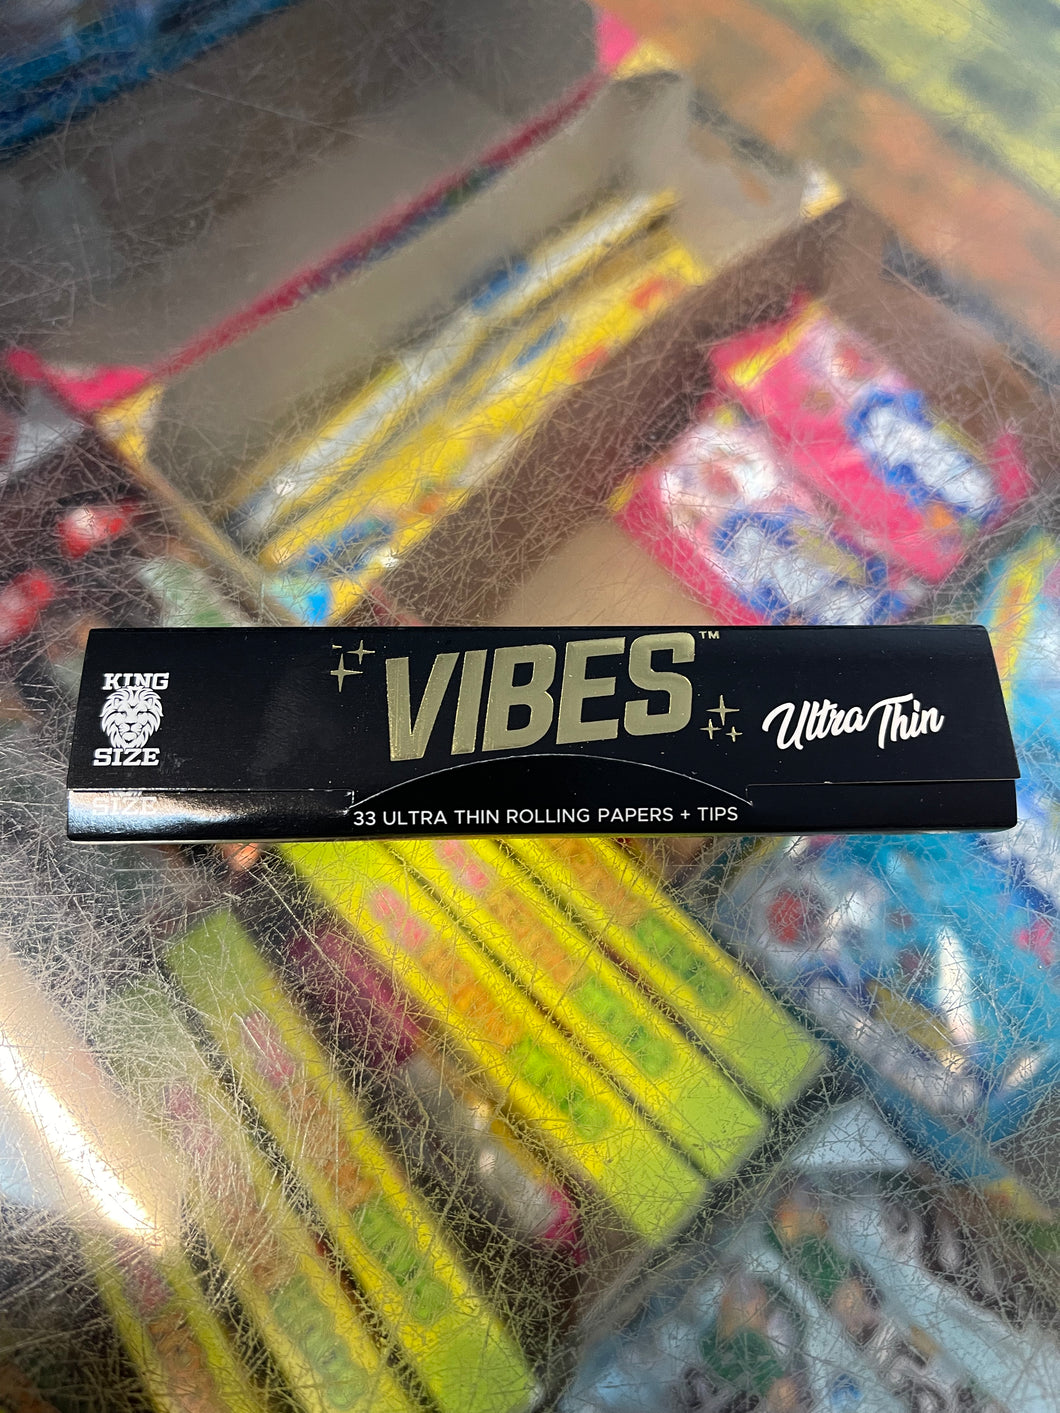 Vibes Ultra Thin Large with tips